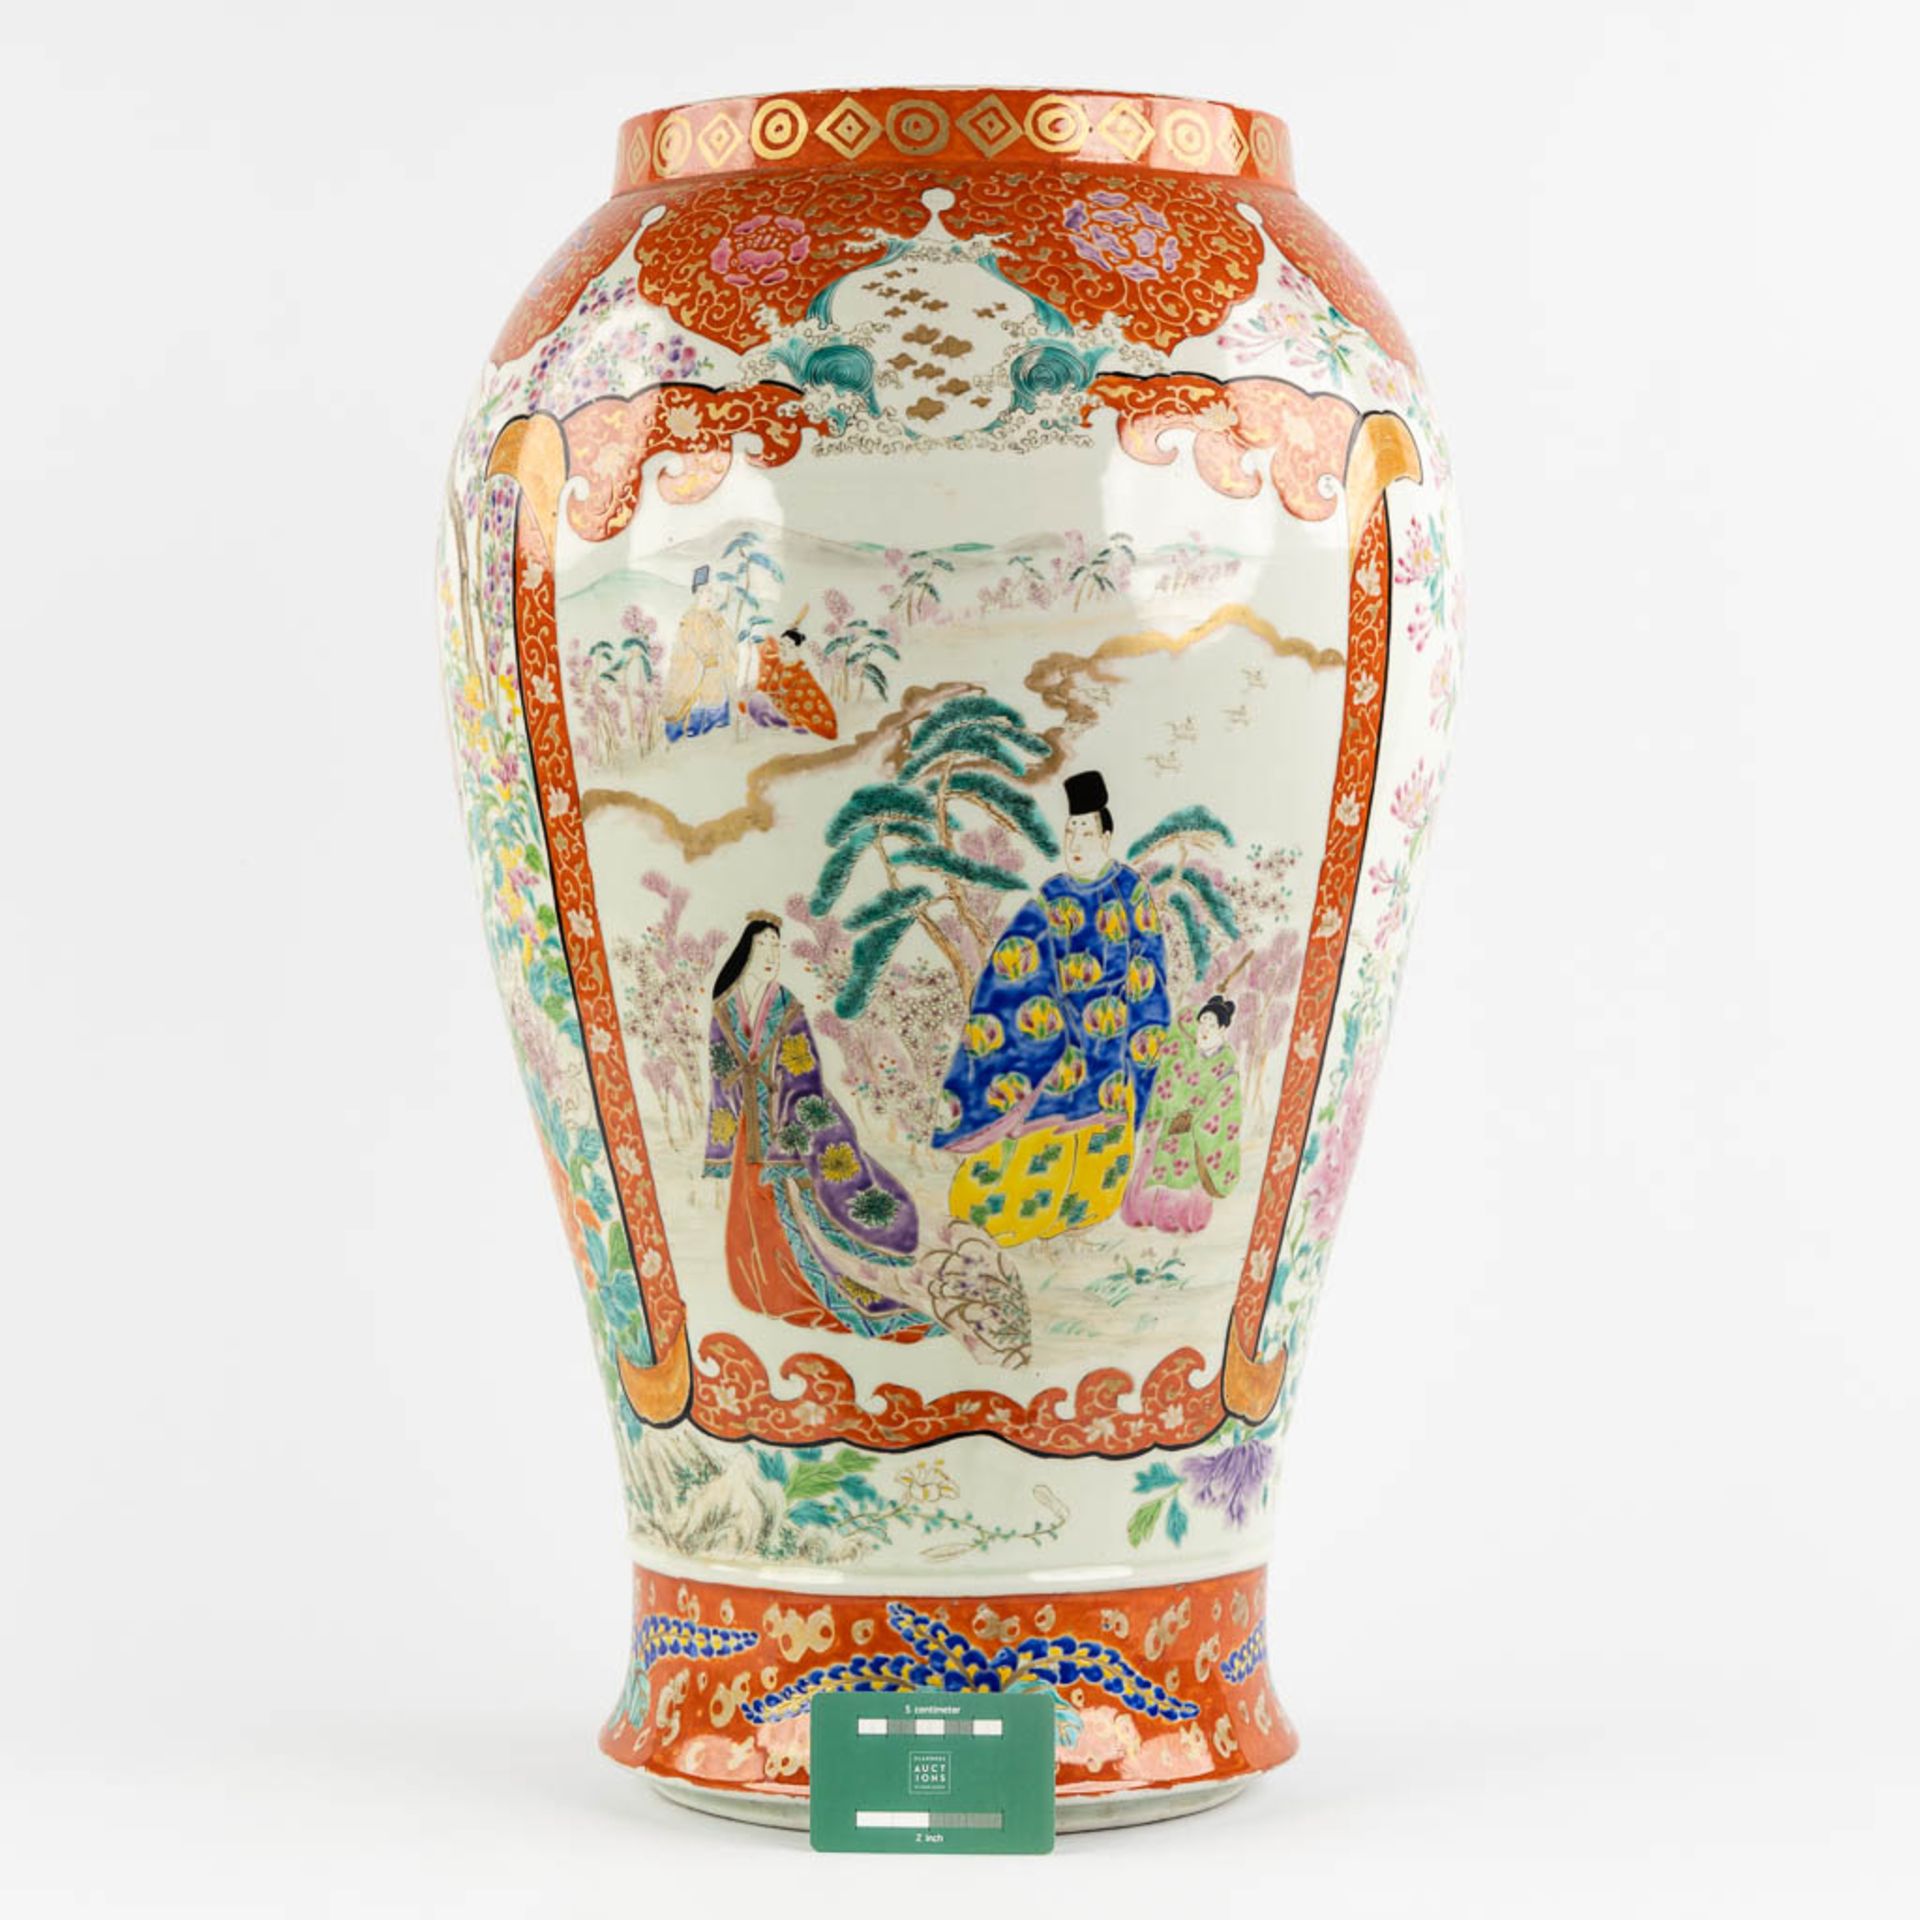 A large Japanese Kutani vase, decorated with fauna and flora. 19th C. (H:61 x D:38 cm) - Image 2 of 13